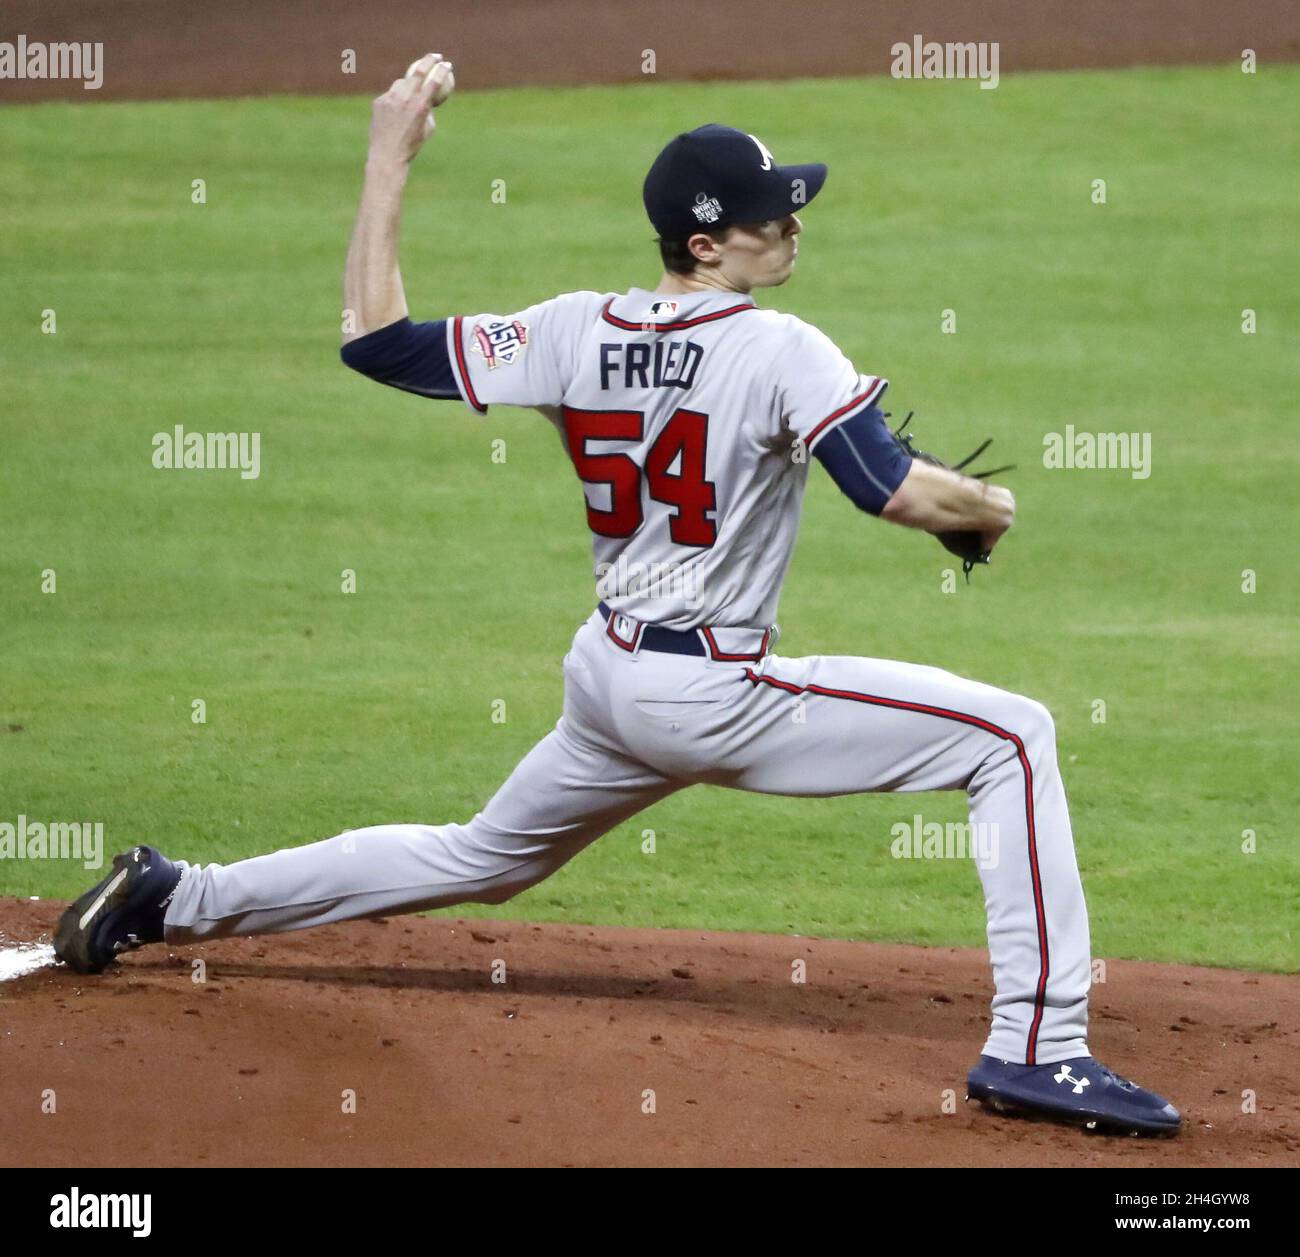 Houston, Texas. Nov. 2, 2021, Max Fried of the Atlanta Braves pitches  against the Houston Astros in Game 6 of the World Series on Nov. 2, 2021,  at Minute Maid Park in